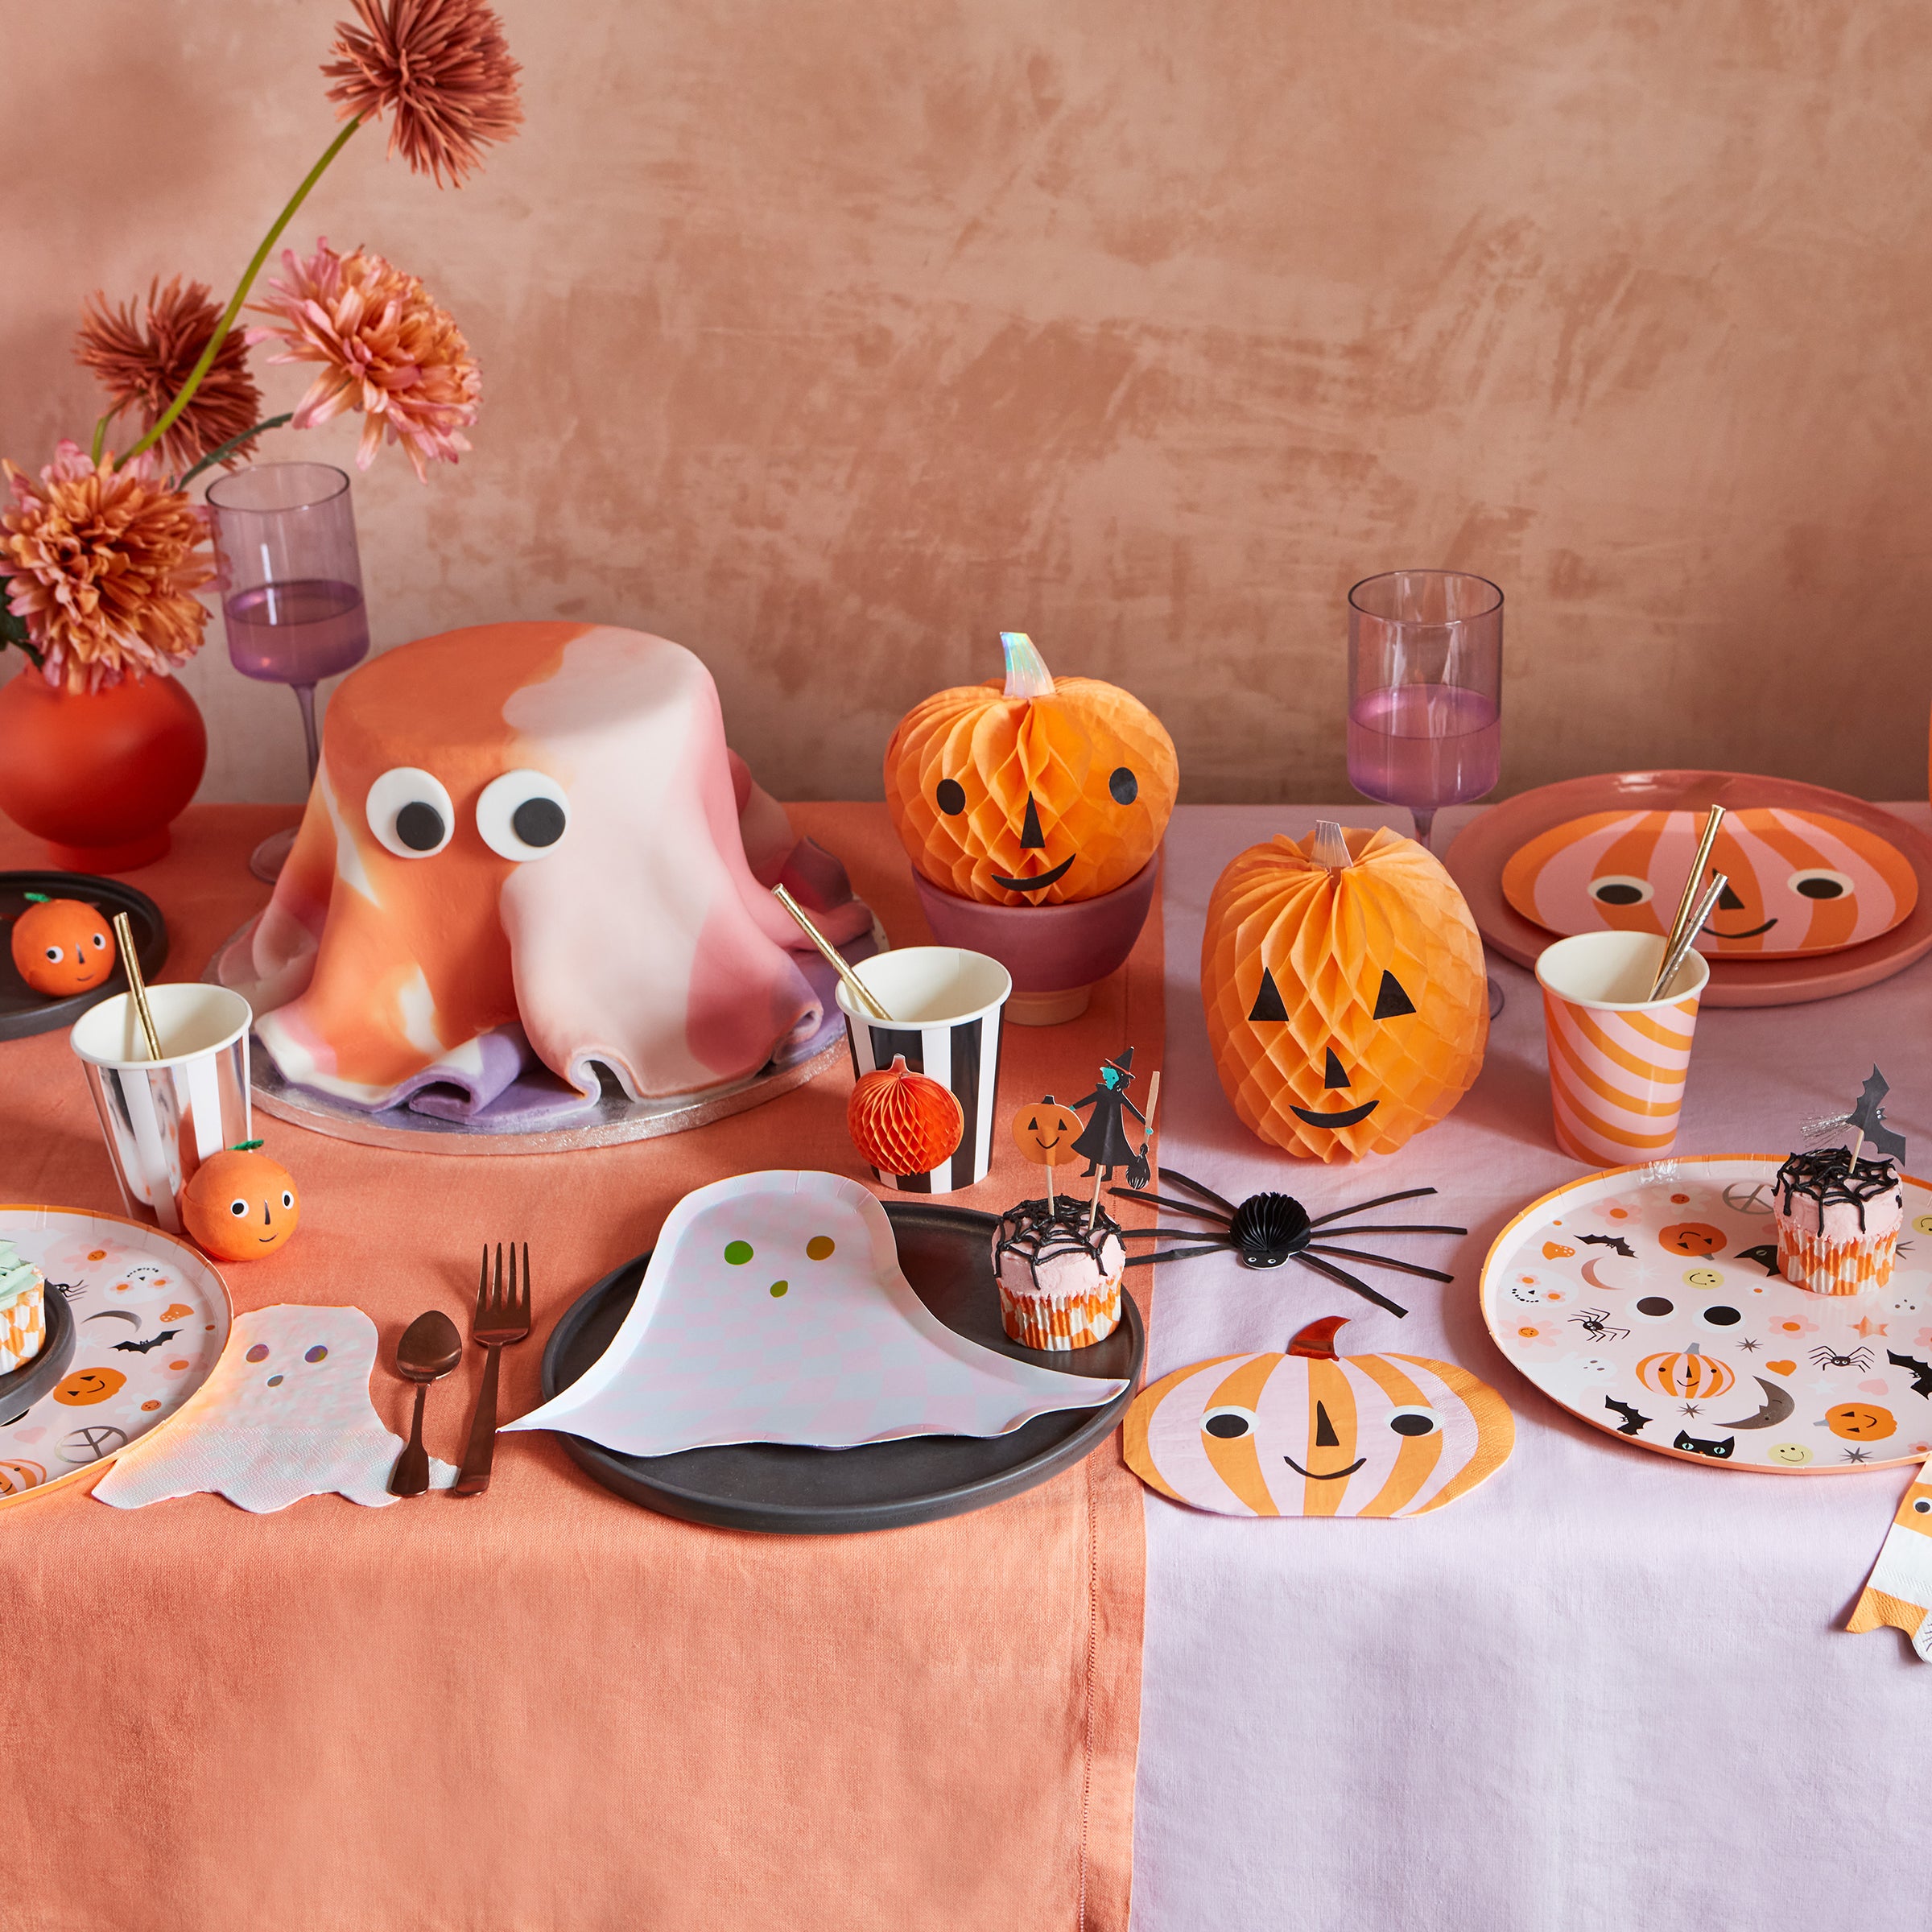 Our pink napkins, the perfect Halloween party napkins, are great if you're looking for Halloween party ideas.